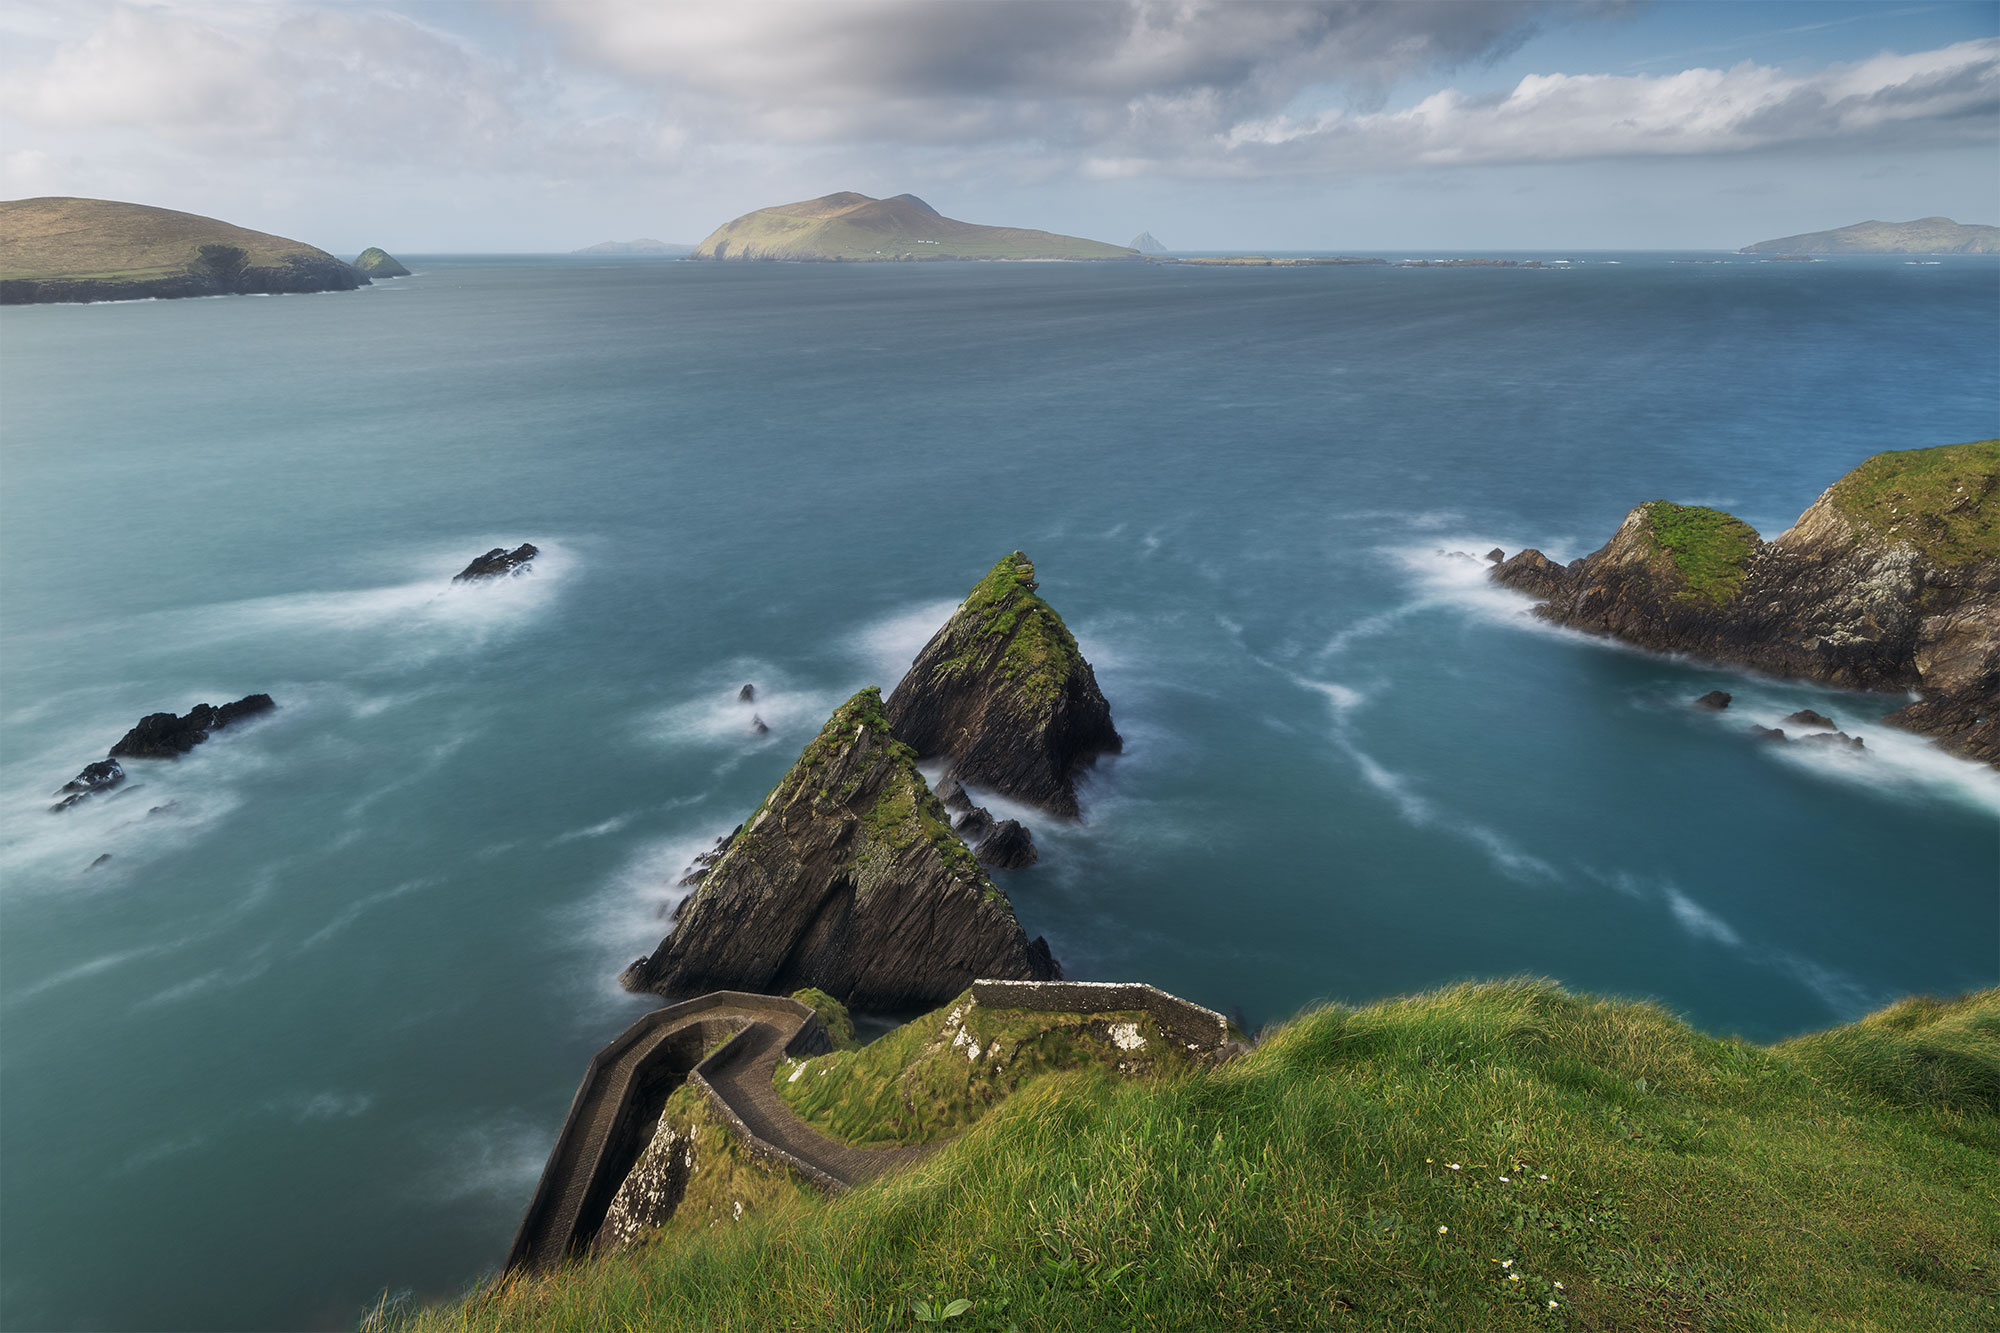 Jennifer Esseiva, a skilled photographer, captures the serene beauty of Dunquin Pier (Cé Dhún Chaoin) on the picturesque Dingle Peninsula along the Wild Atlantic Way in Ireland. Using her Nikon Z8, she employs a long exposure technique to depict the tranquil waters surrounding the pier, creating a mesmerizing effect. This landscape photograph invites viewers to immerse themselves in the tranquil ambiance of this iconic Irish coastal landmark.